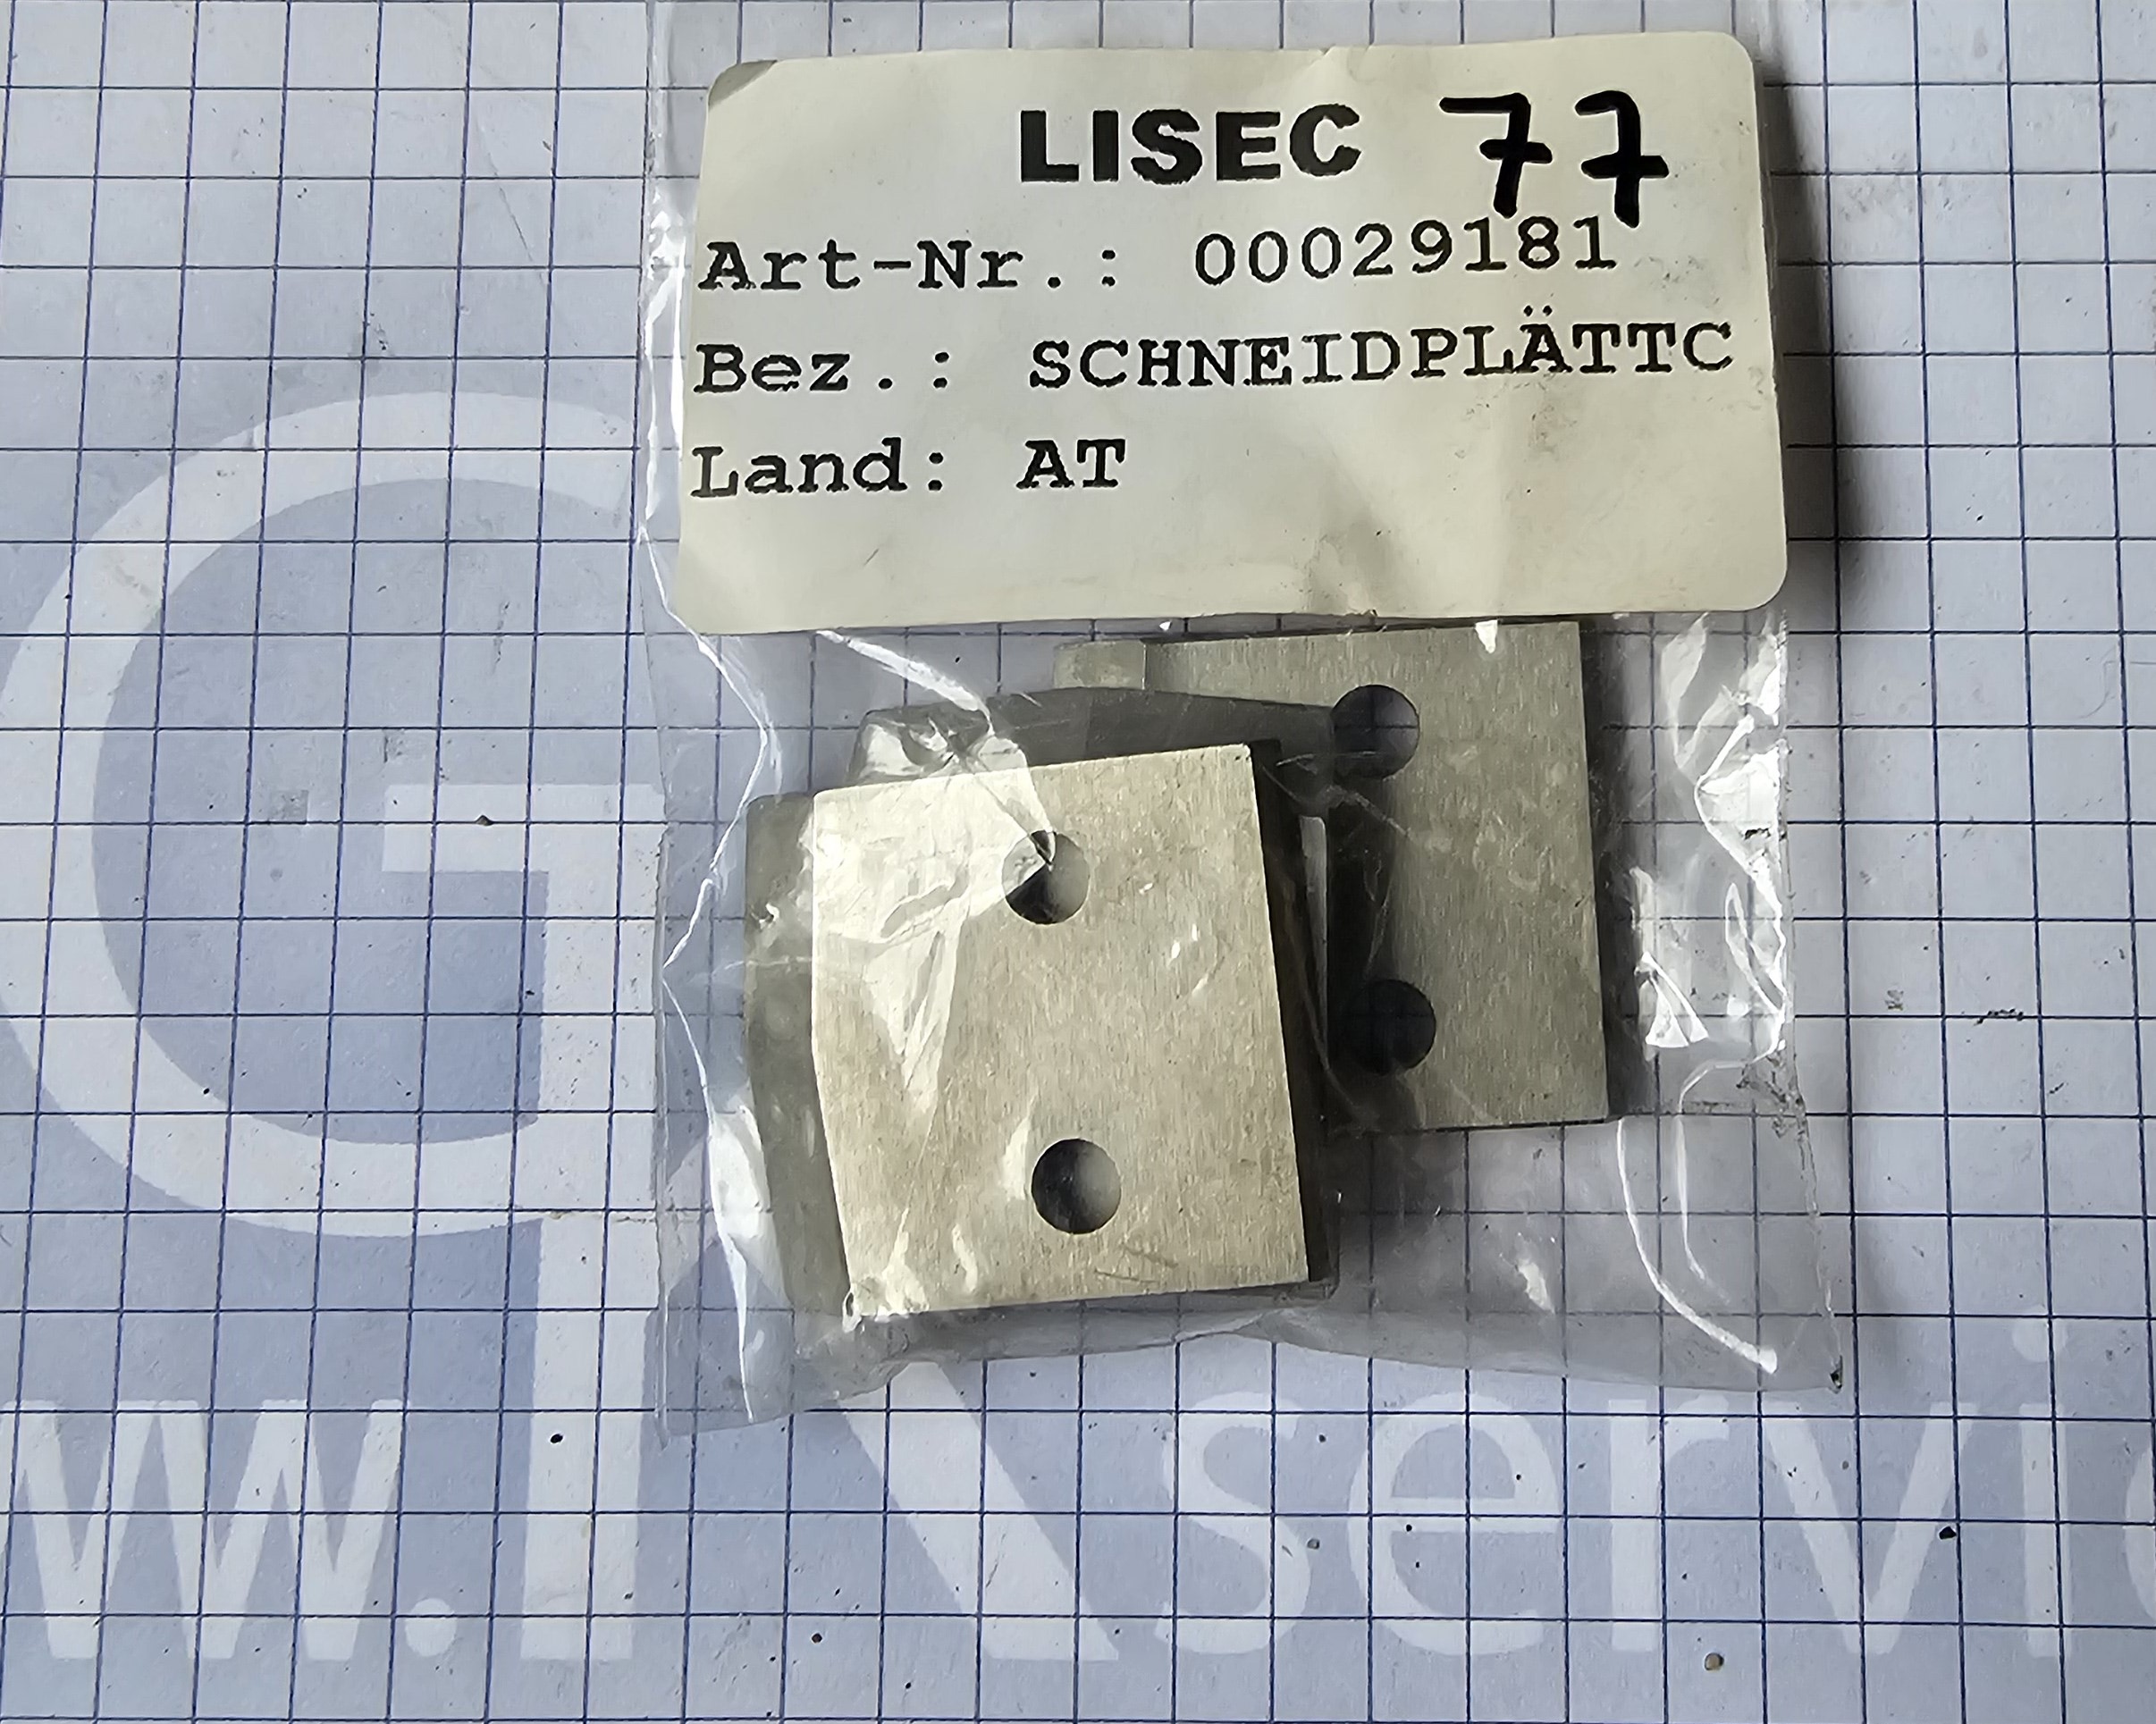 OND-101 Lisec cutting plate nozzle